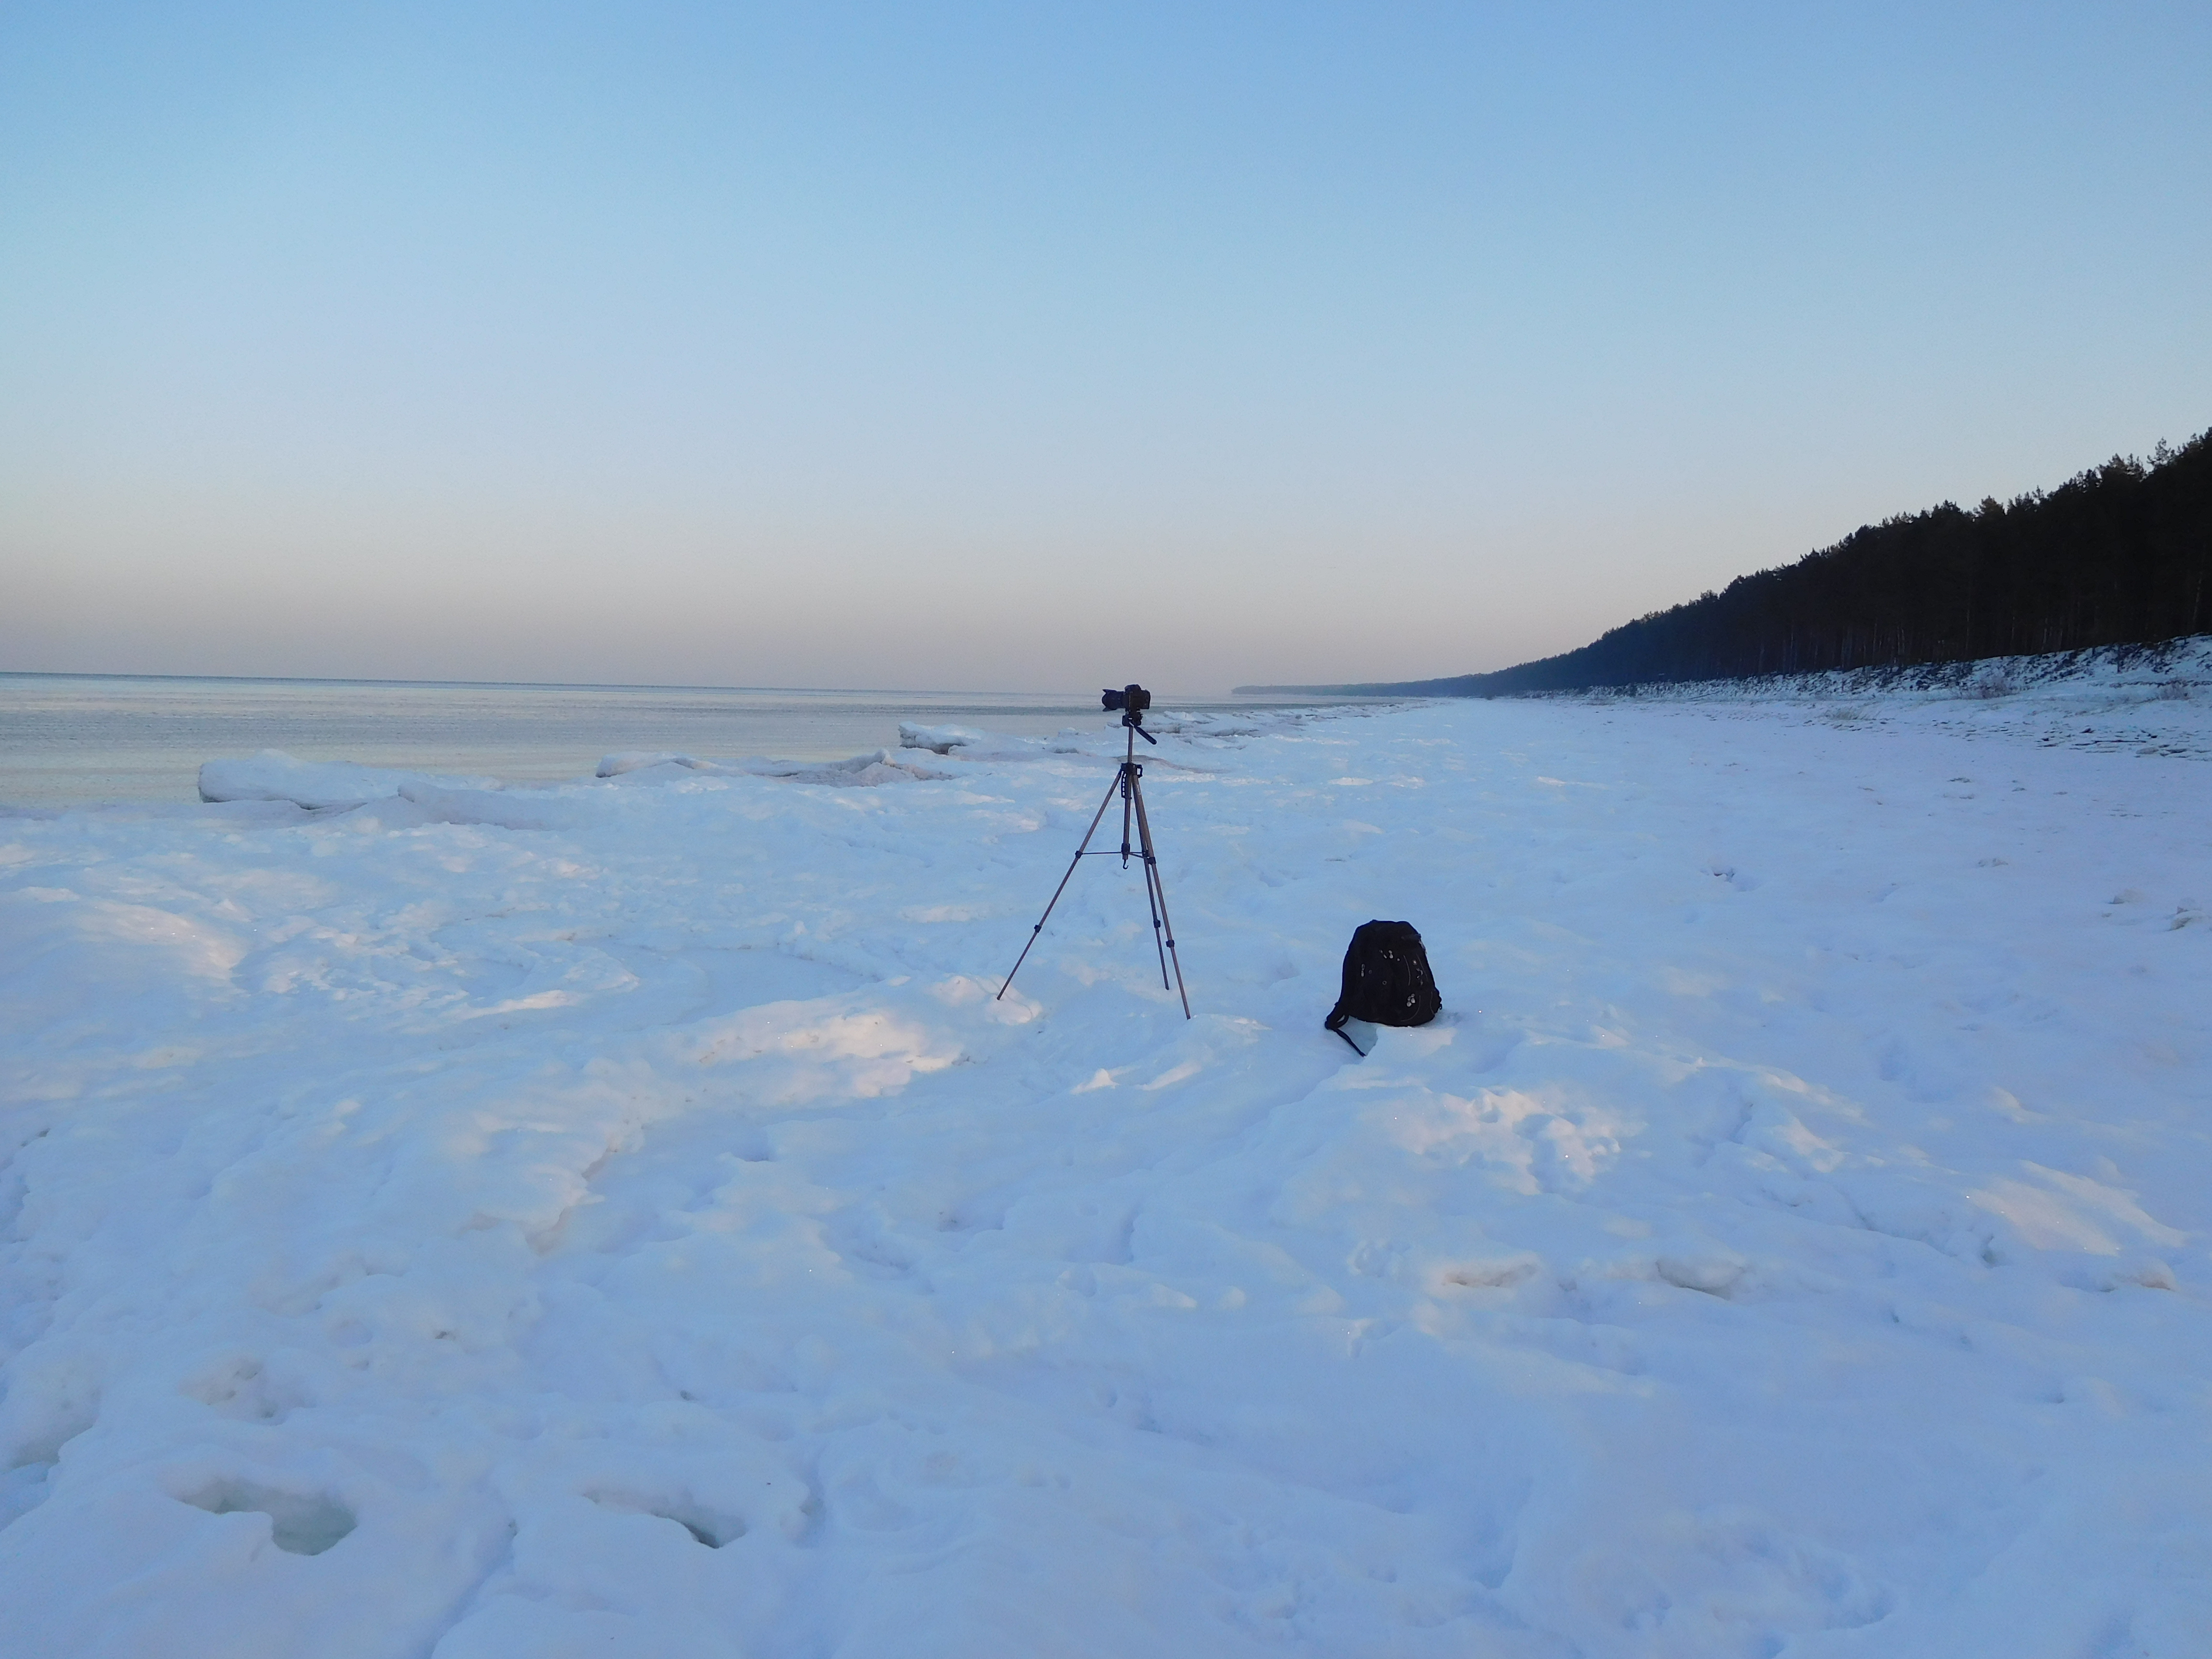 Set up to video the frozen beach. -6 degrees and windy.